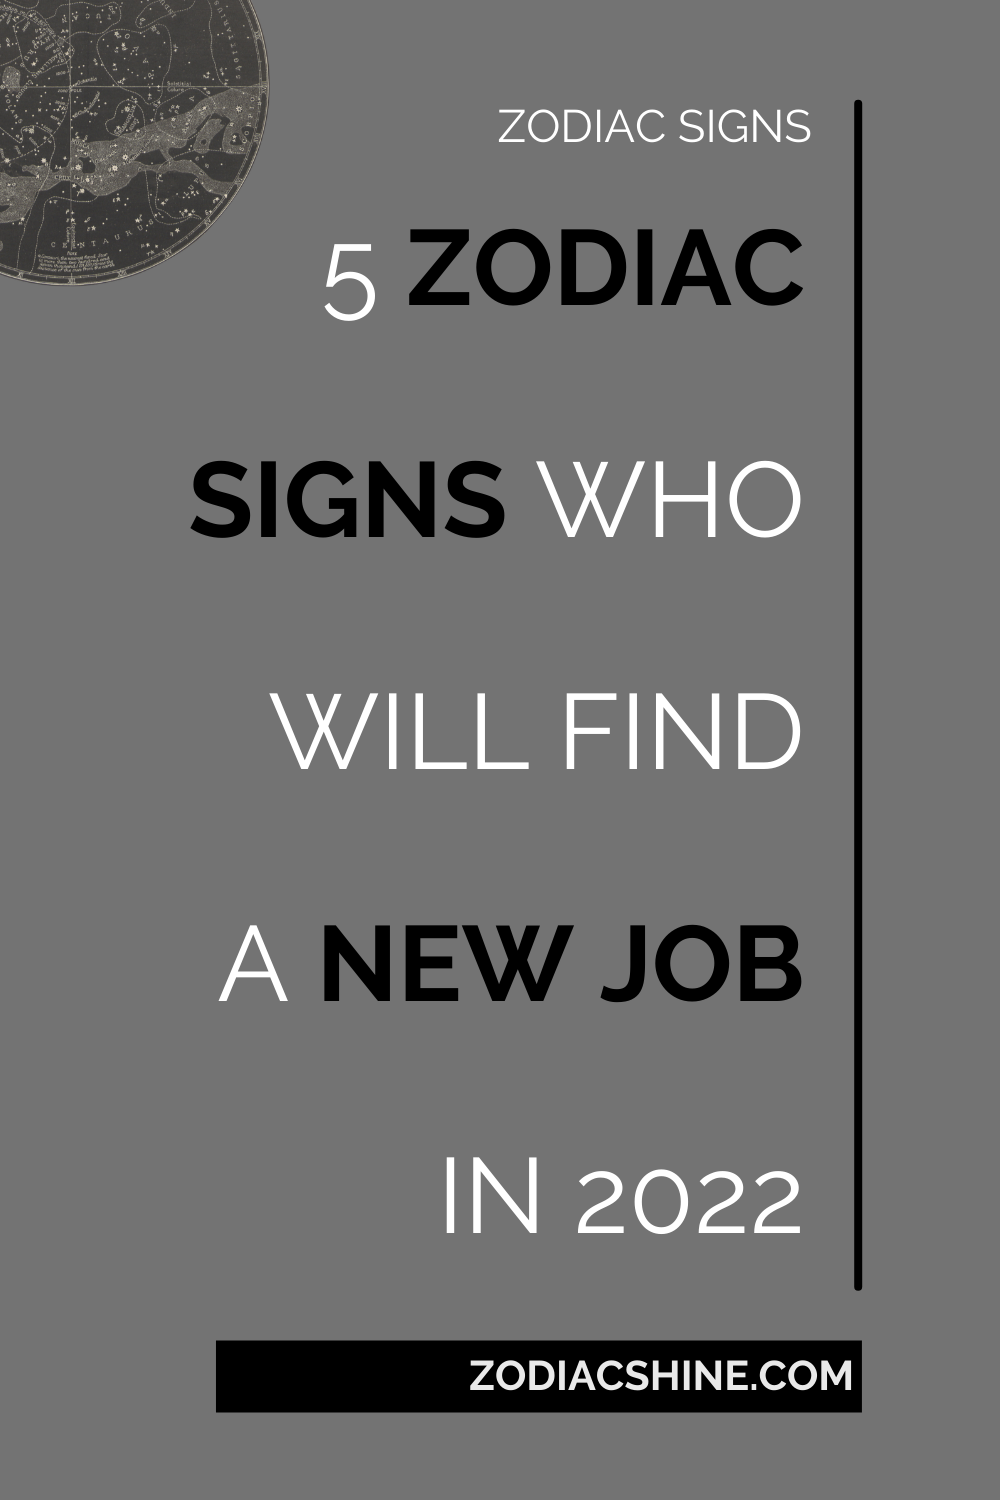 5 ZODIAC SIGNS WHO WILL FIND A NEW JOB IN 2022